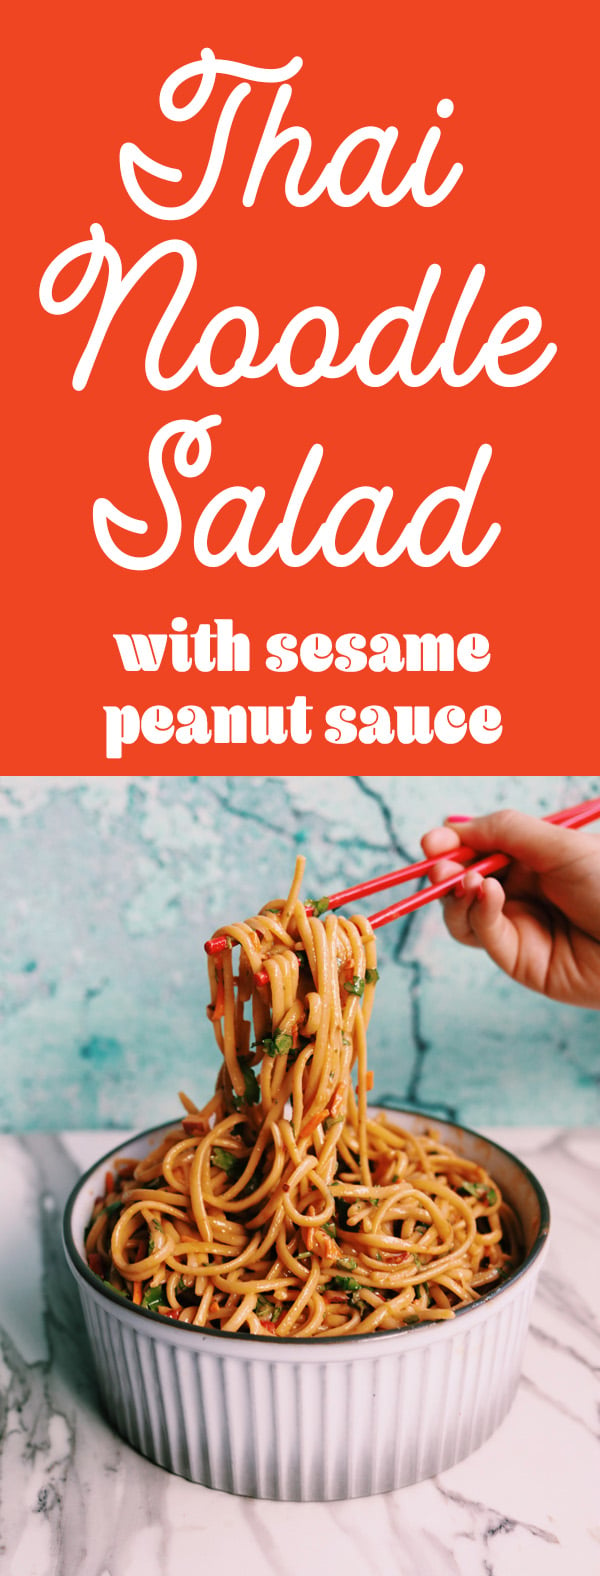 This crunchy Thai noodle salad is smothered in my favorite sesame peanut sauce. It’s easy to make and absolutely addicting to eat! You can serve these noodles cold or hot and add even more sriracha for a kick! #under30 #pastasalad #asian #thaifood #vegetarian #noodles #peanutsauce #thainoodlesalad